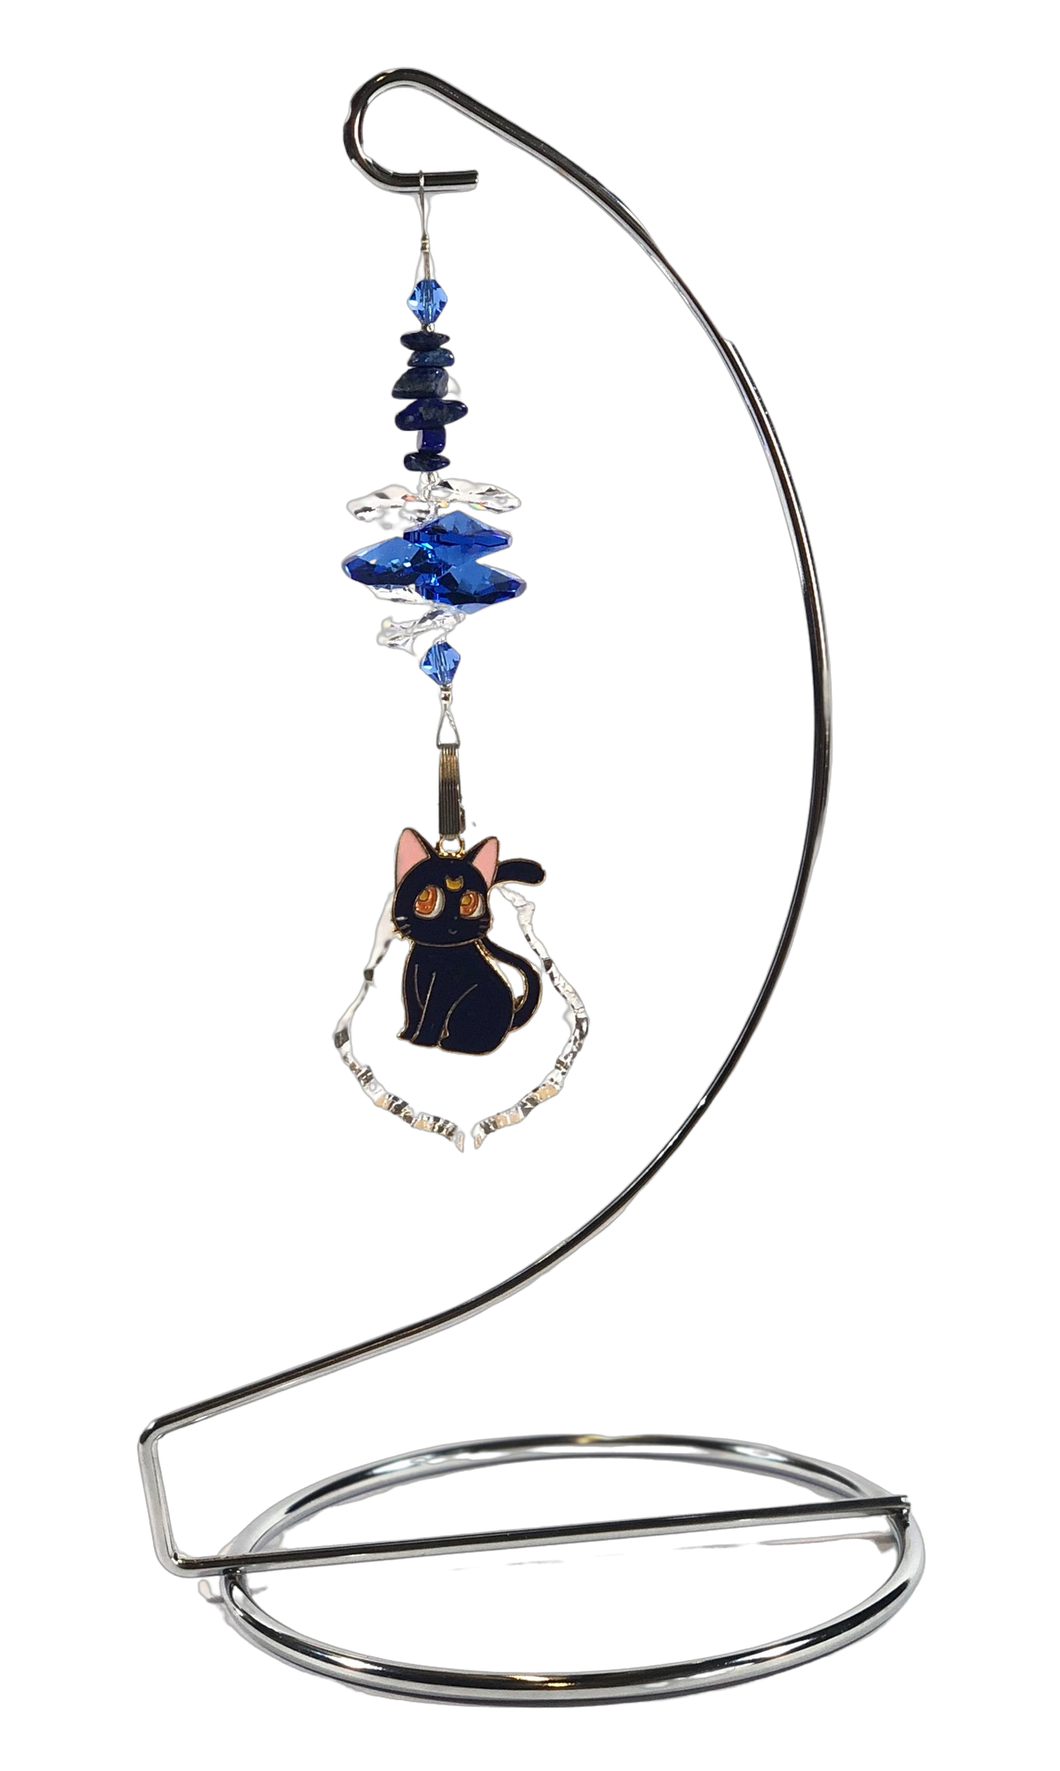 Sailor Moon - Luna crystal suncatcher is decorated with lapis Lazuli gemstones and come on this amazing stand.